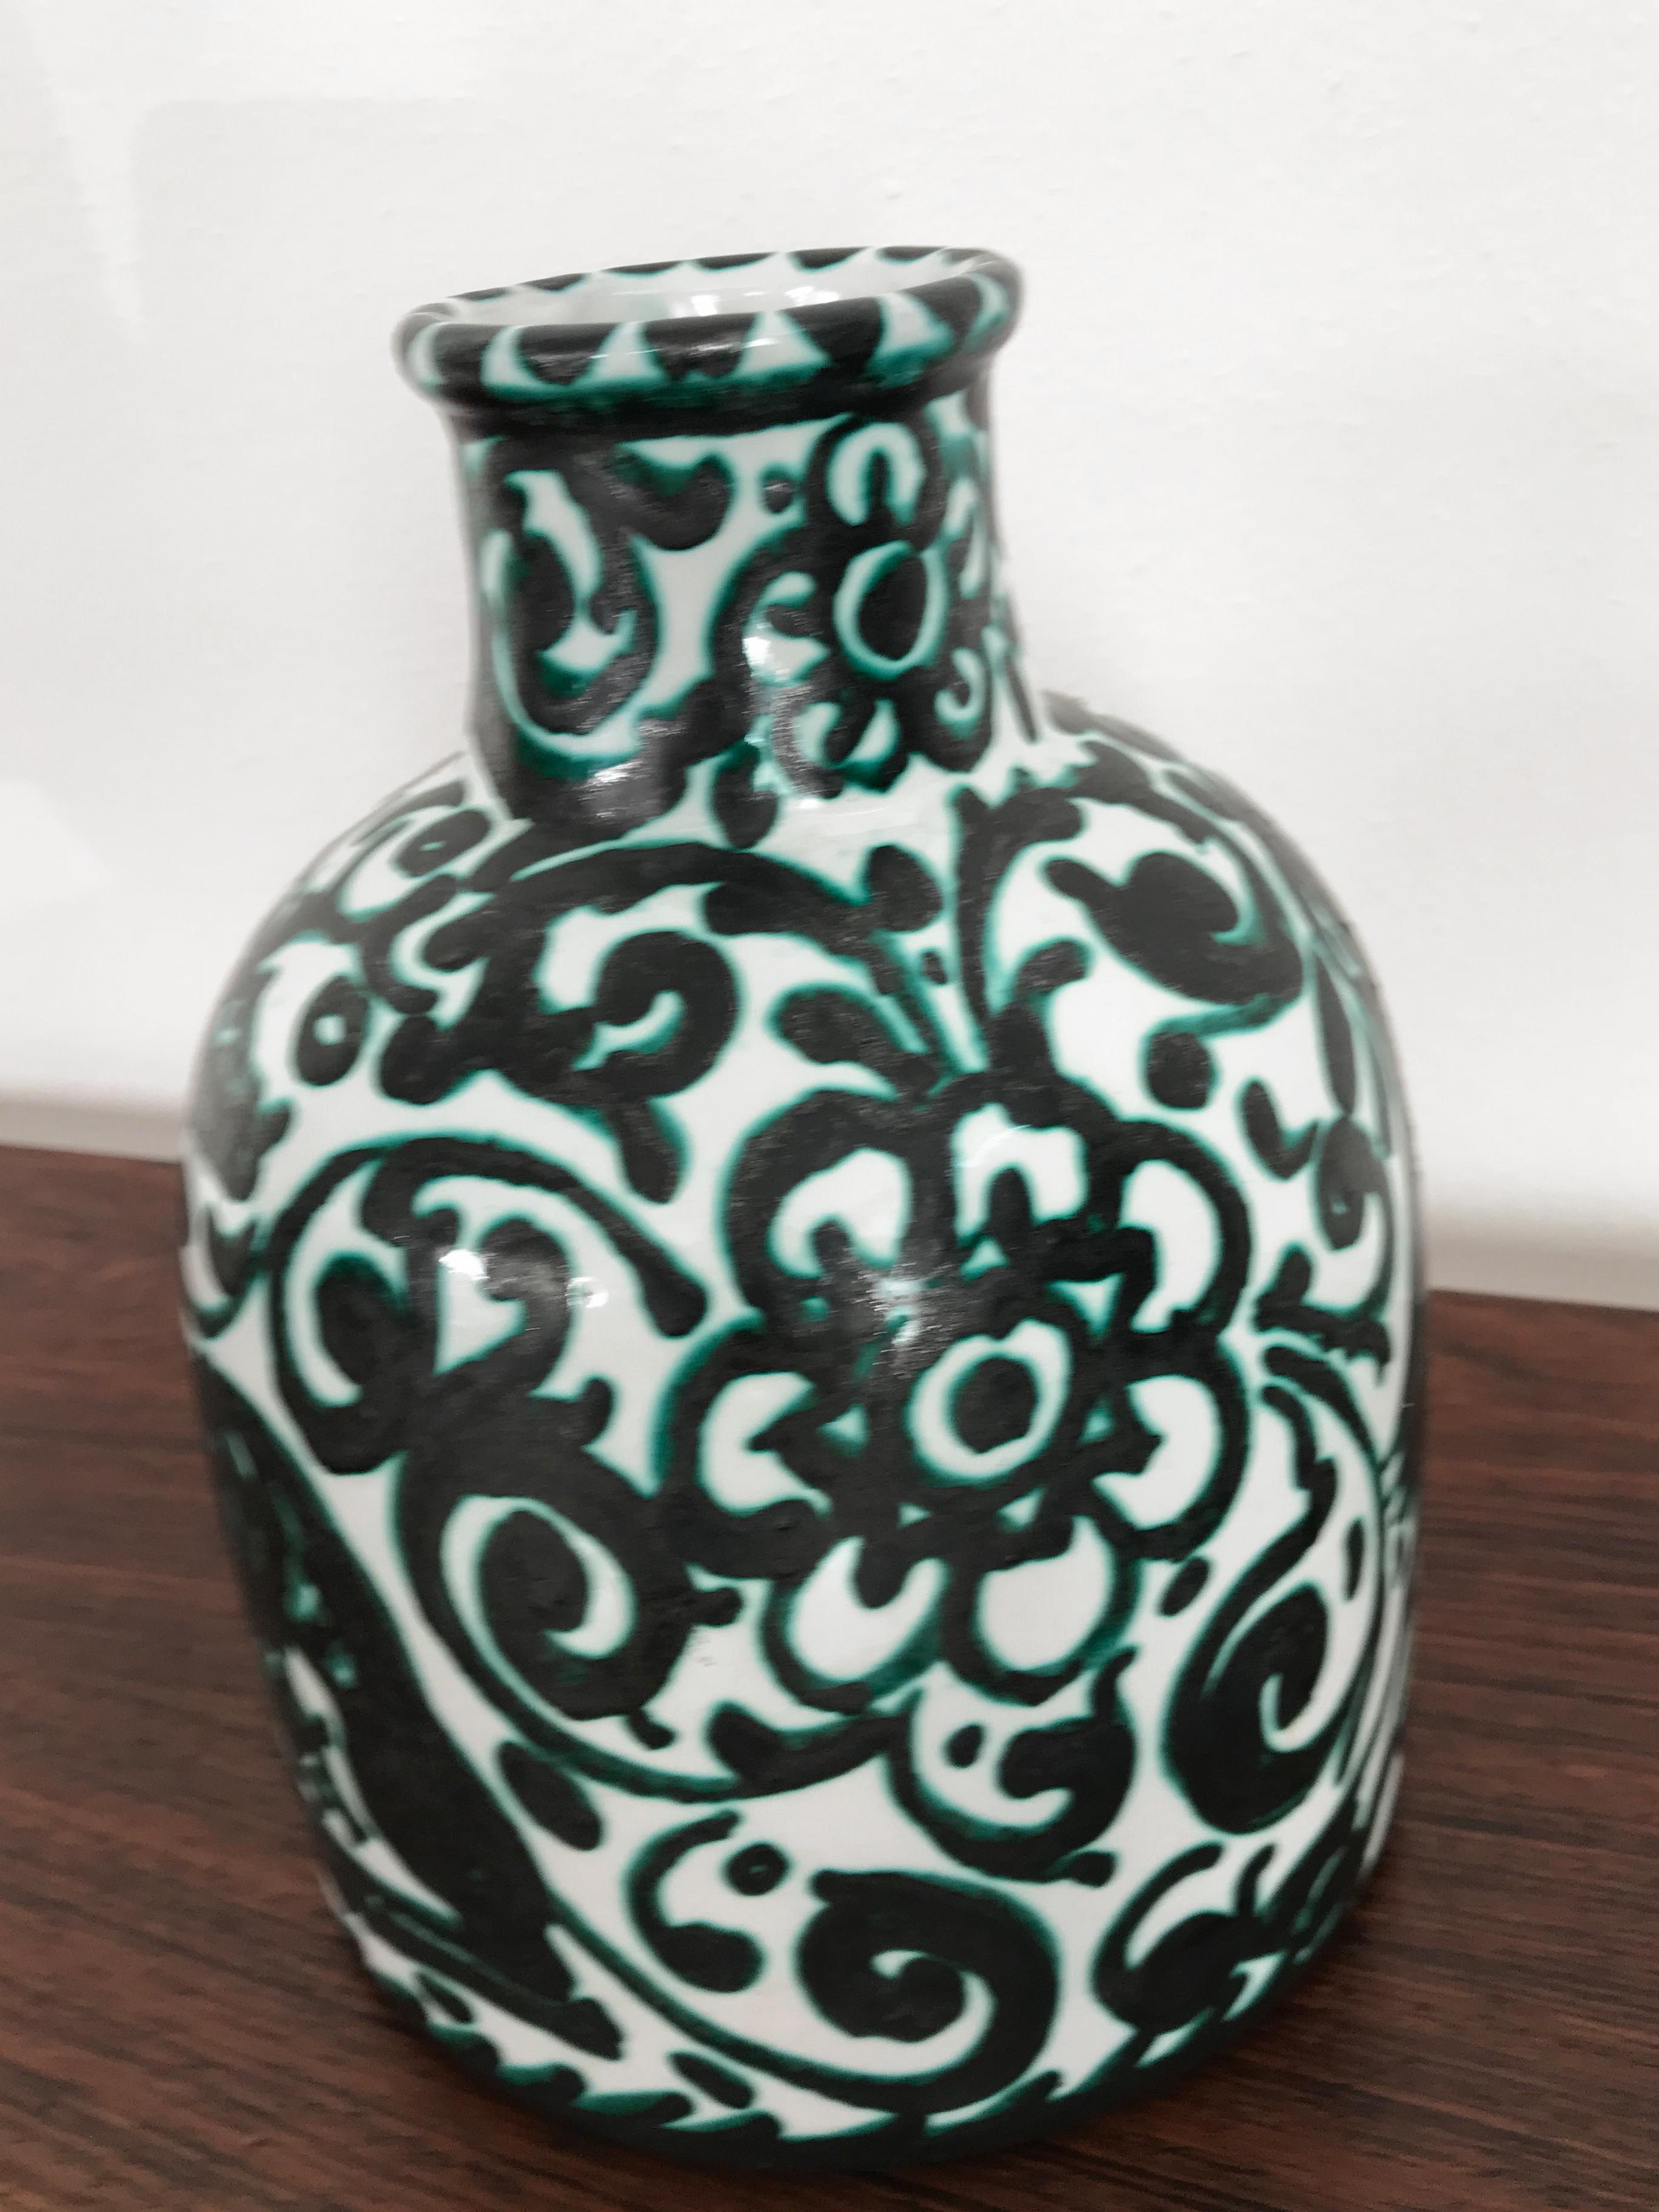 Italian midcentury modern design hand decorated ceramic vase designed by Giulio Guerrieri and produced by “Ceramiche Guerrieri Murano” with Made in Italy Guerreri Murano signature printed under base, Italy 1950s